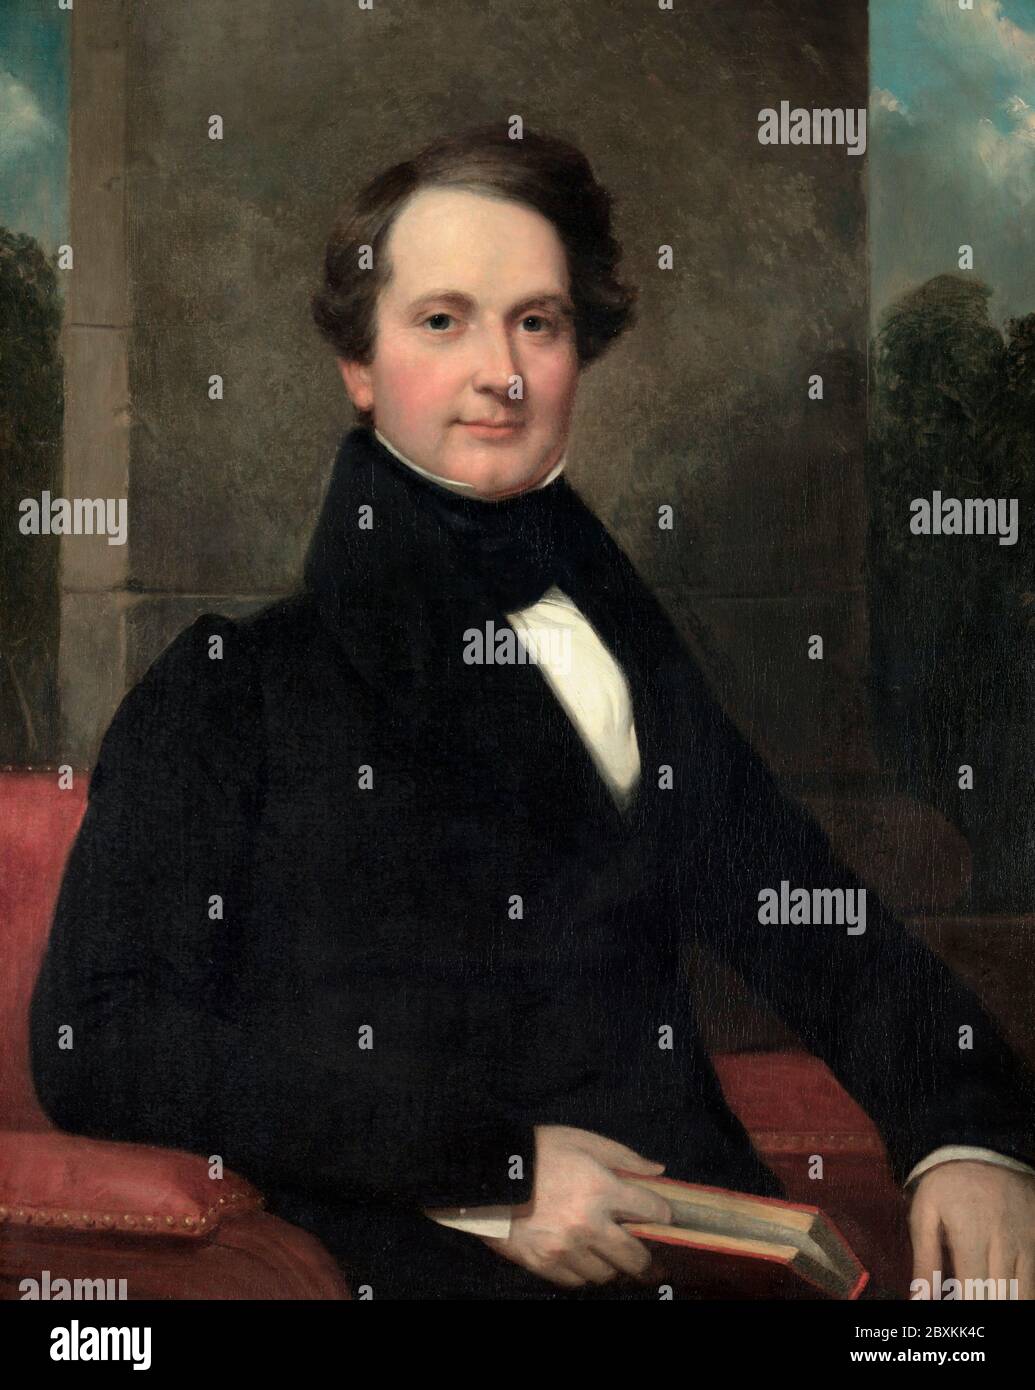 Frederic Betts; Mary Ward Betts by Henry Inman, 1830s Stock Photo